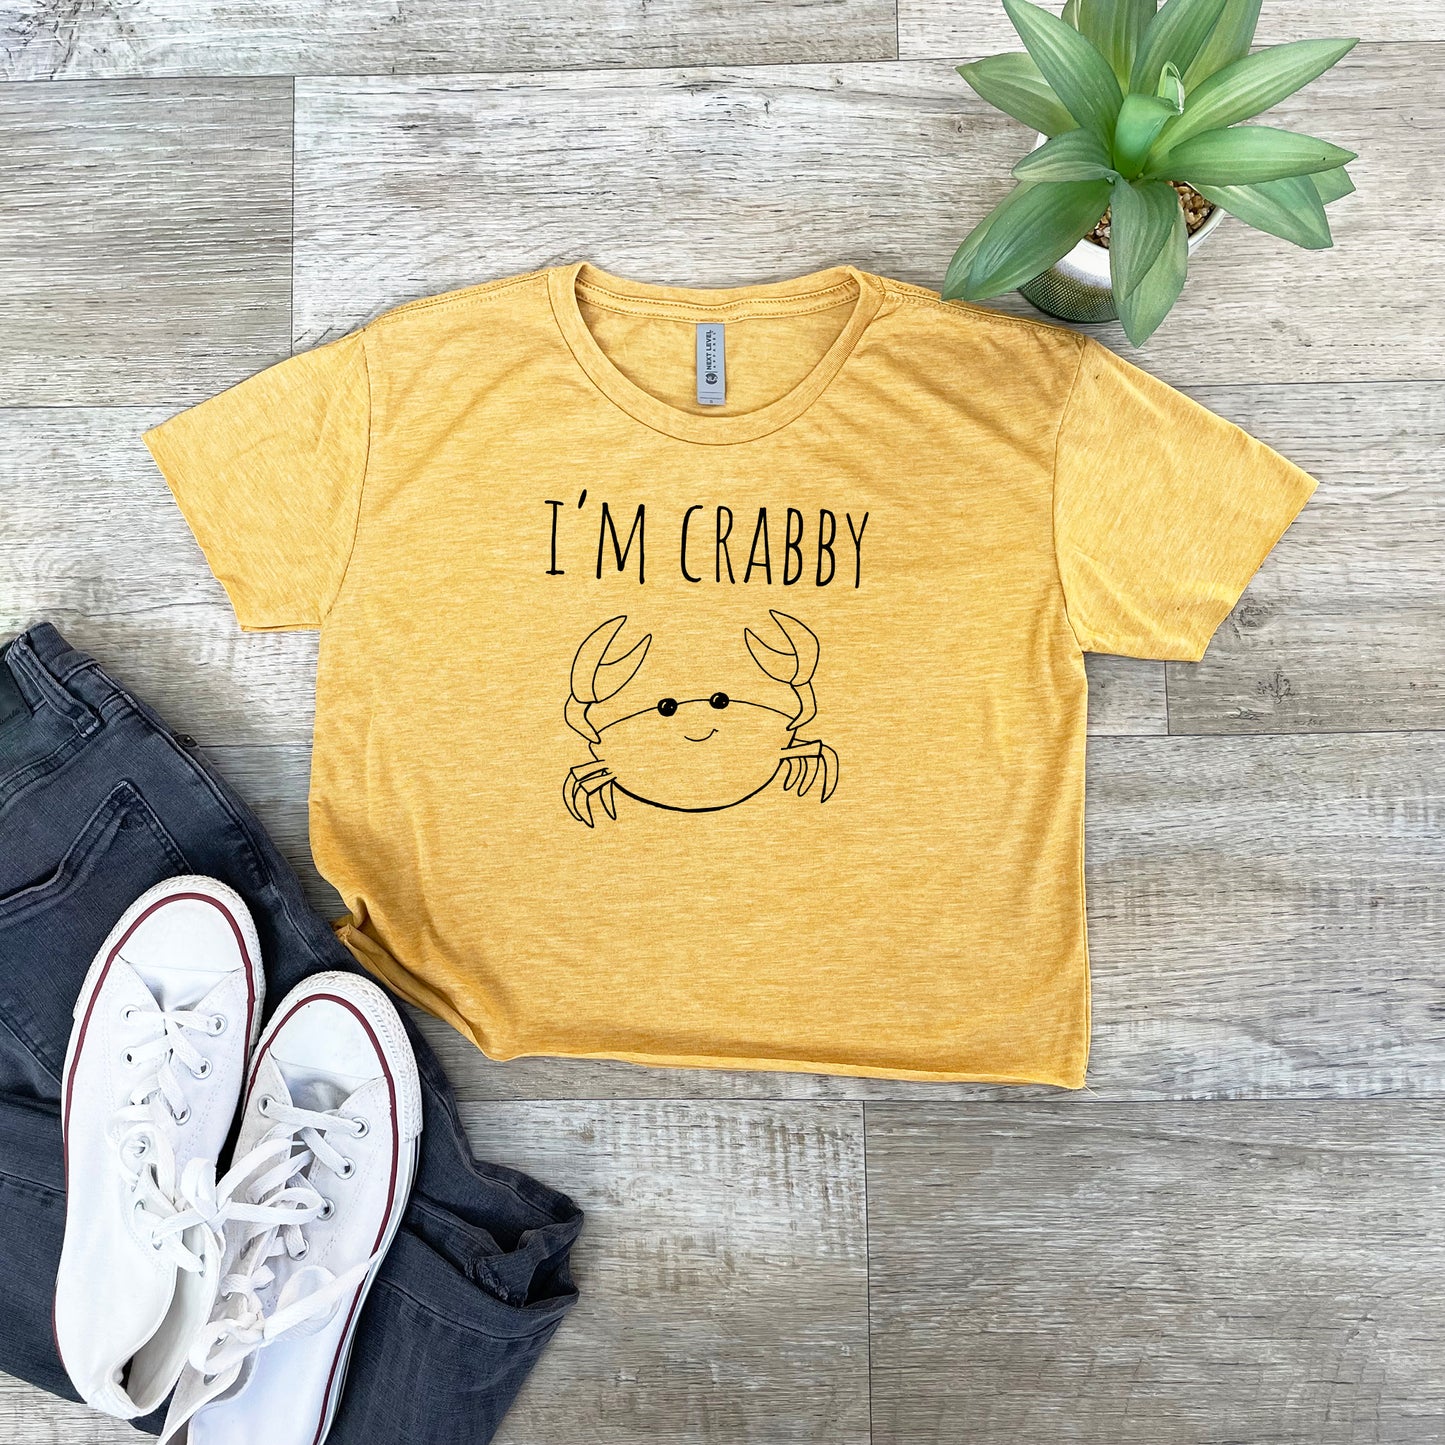 I'm Crabby - Women's Crop Tee - Heather Gray or Gold